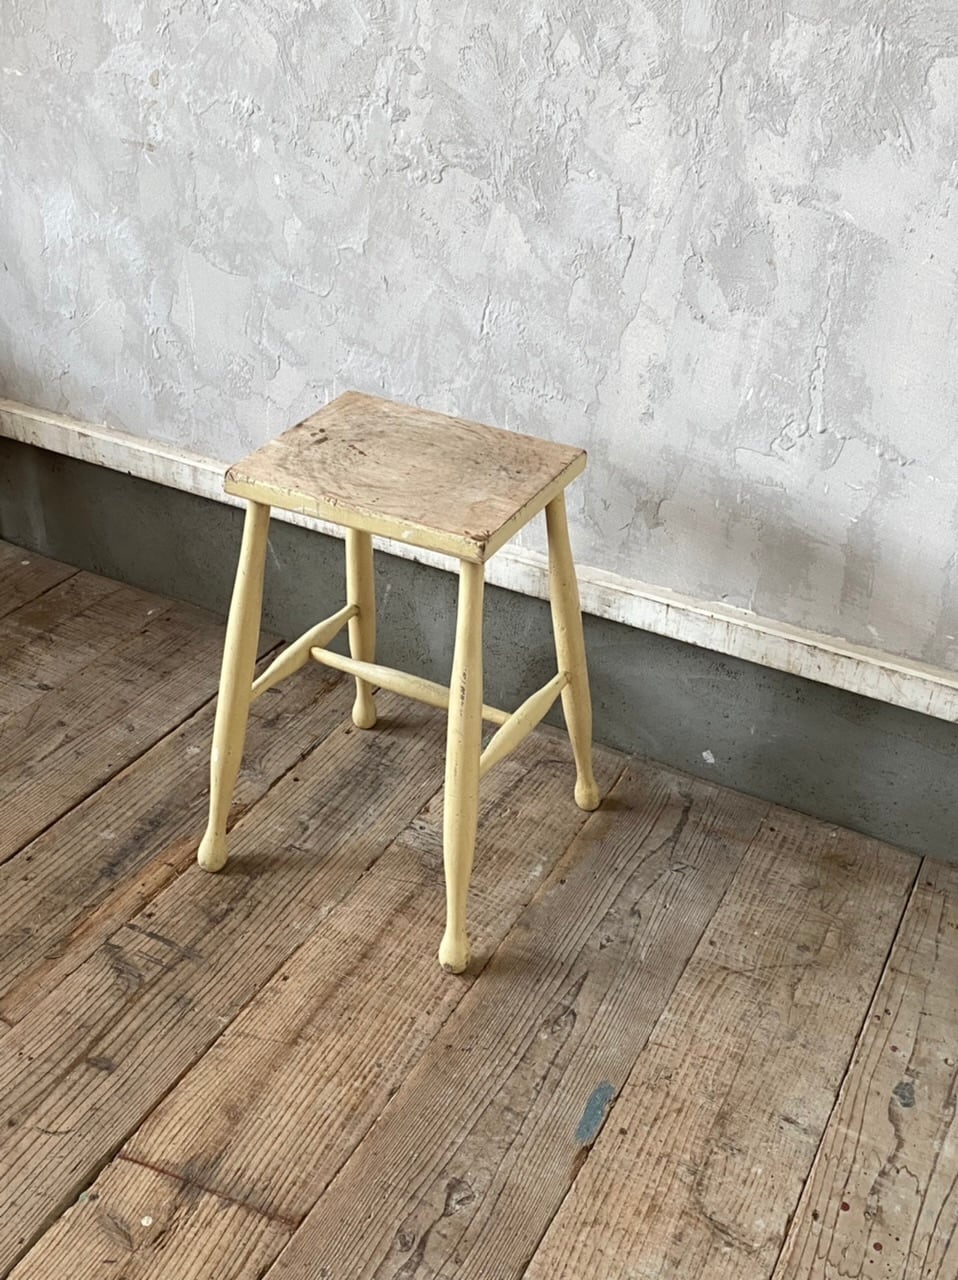 Painted Stool (A25-91)